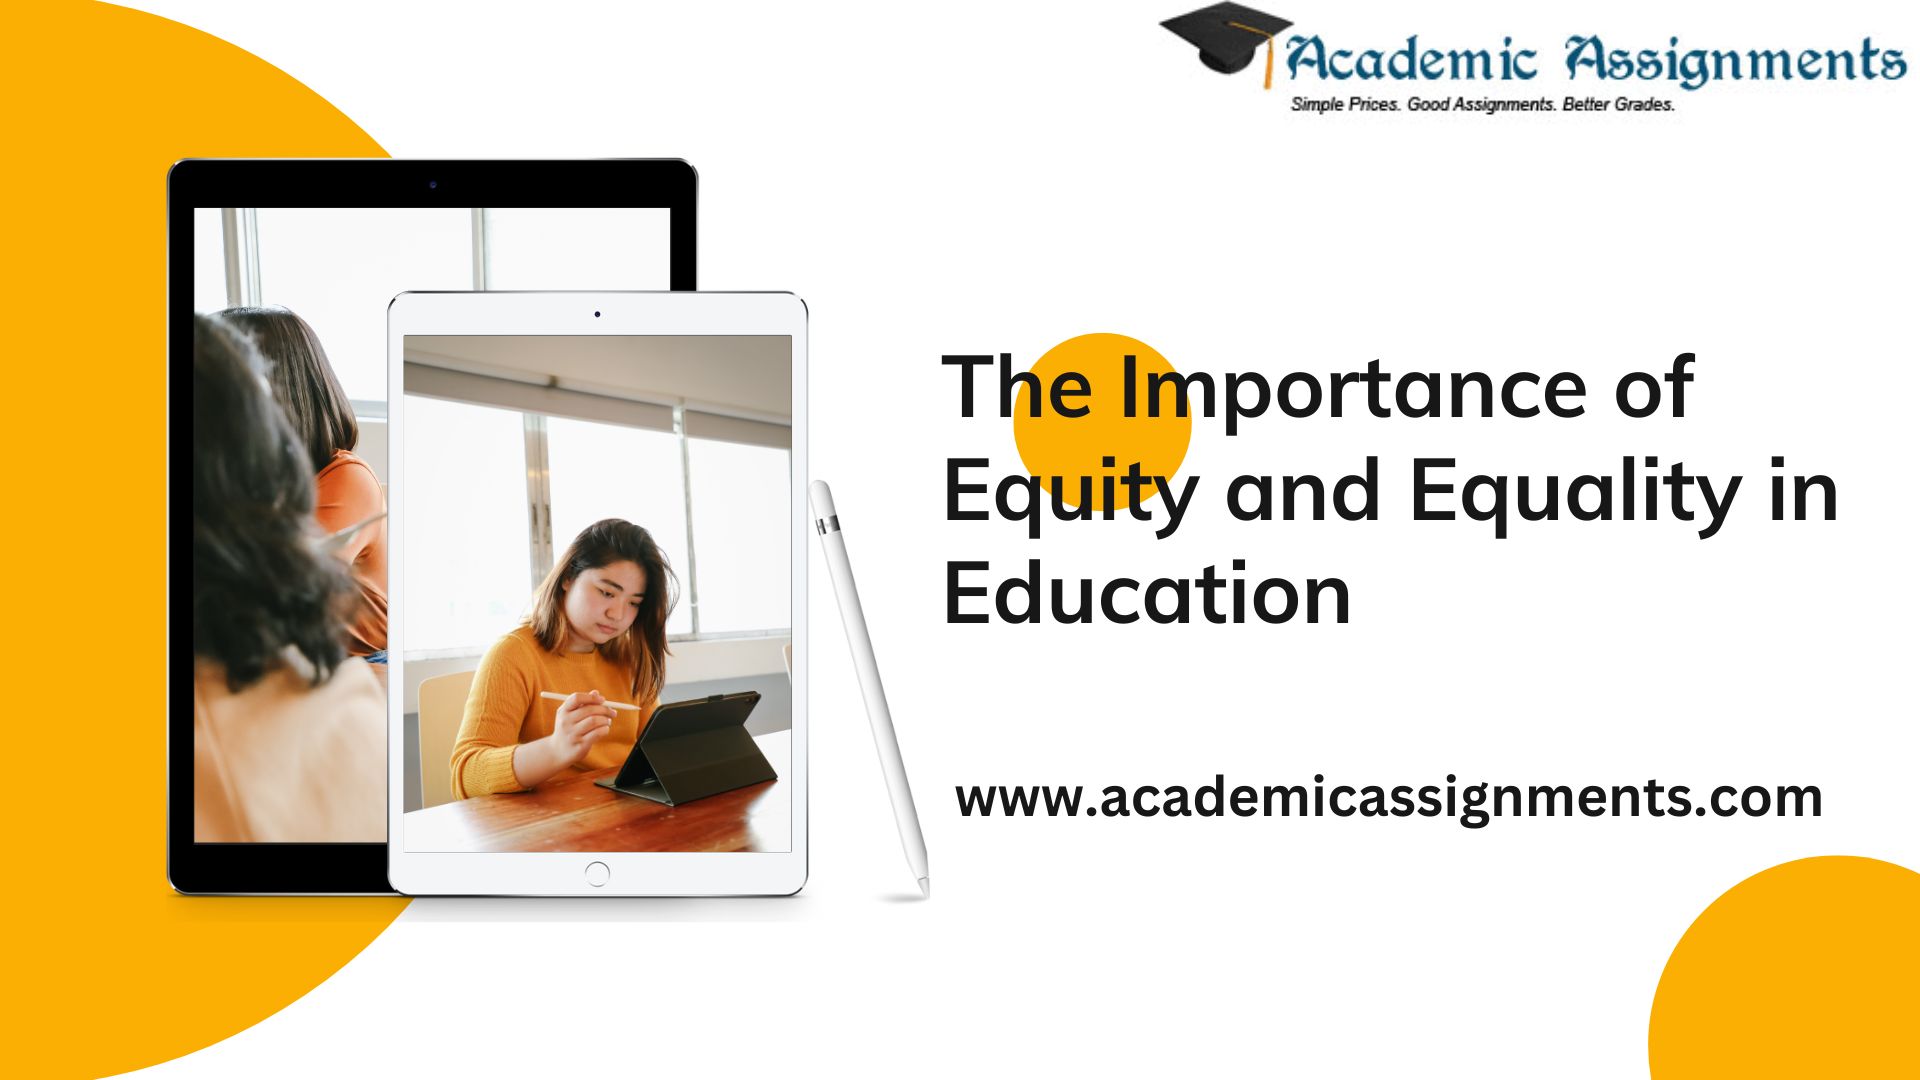 The Importance of Equity and Equality in Education